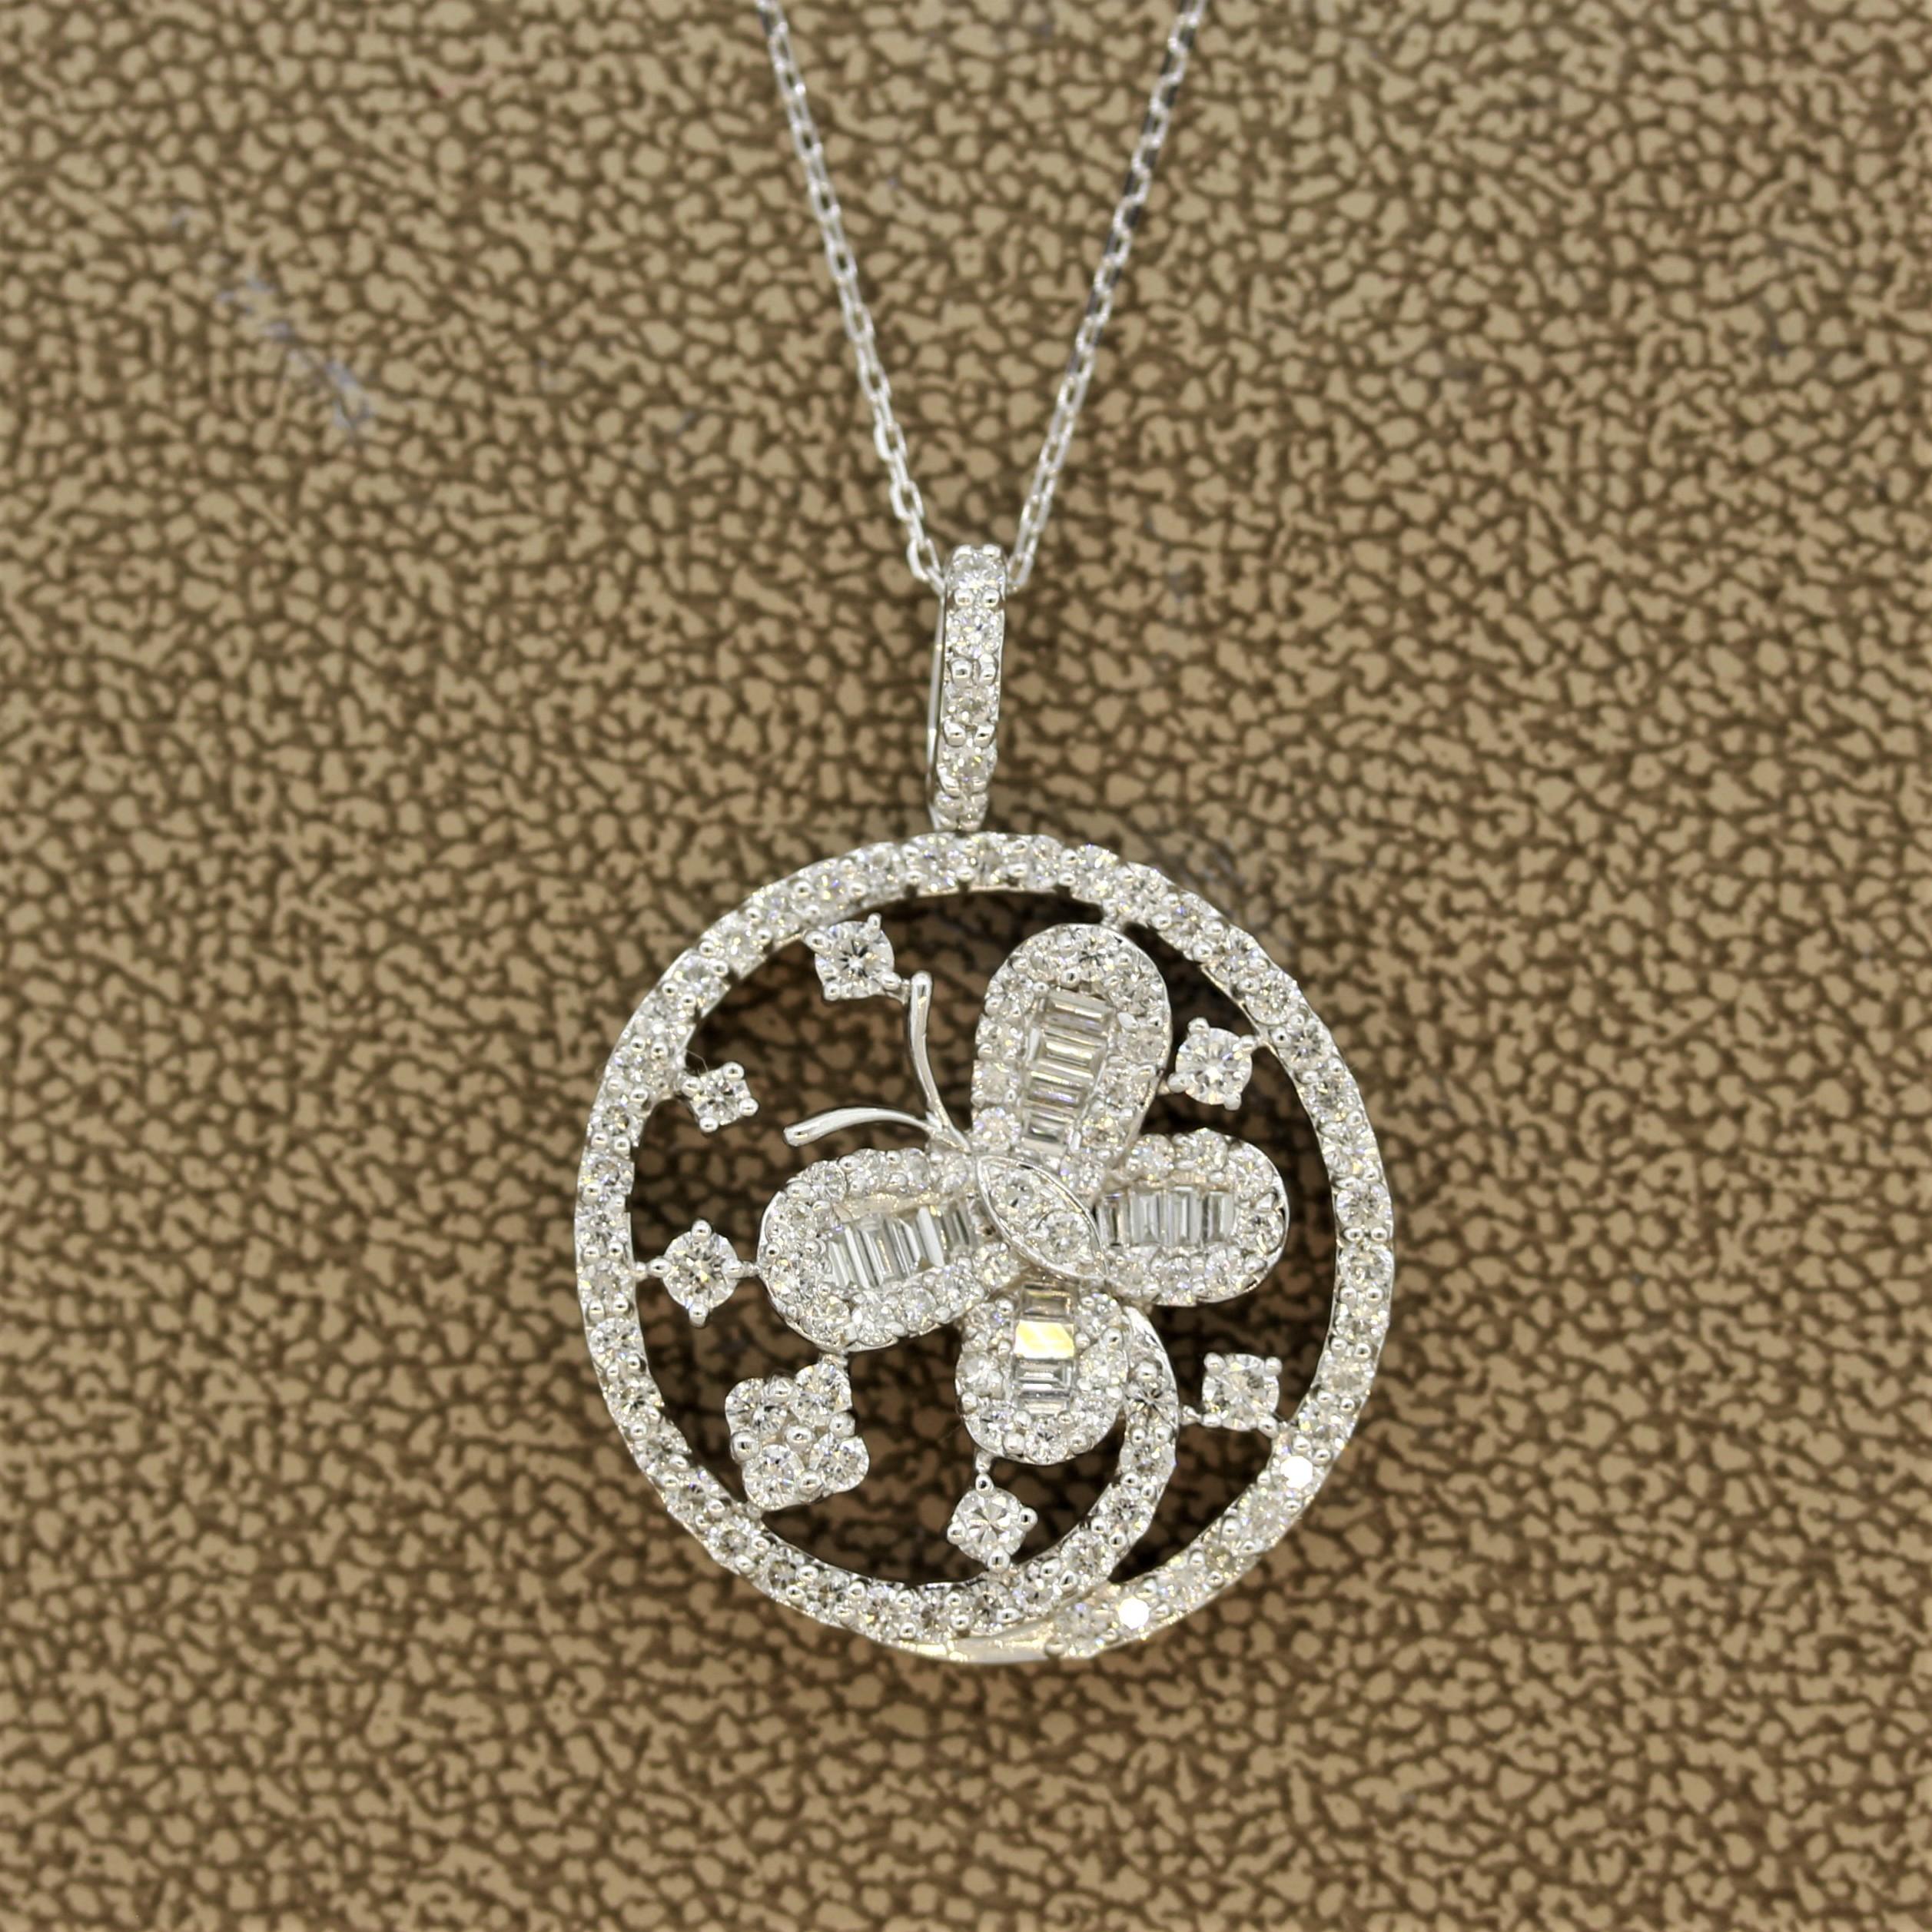 A sweet and charming pendant depicting a wild butterfly. It features 1.58 carats of round brilliant and baguette cut diamonds. Made in 18k white gold.

Pendant Length: 0.90 inches

Chain Length: 18 inches (extra bail can be worn as 16 inch)